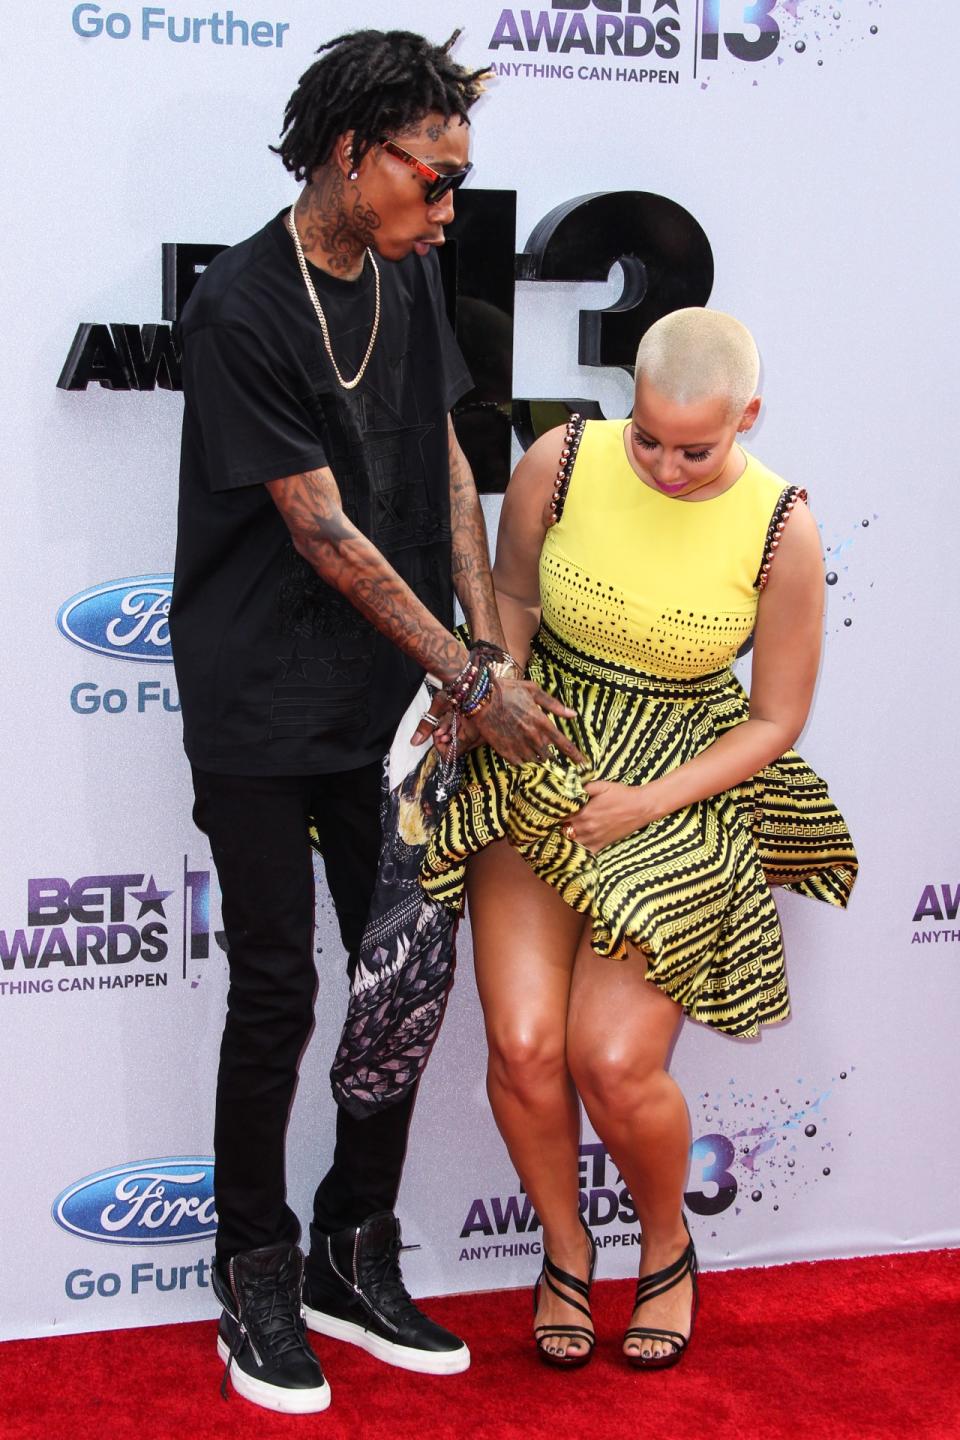 Ever the lover of her rear, Amber Rose flashed her backside while on the red carpet at the 2013 BET Awards alongside Wiz Khalifa.